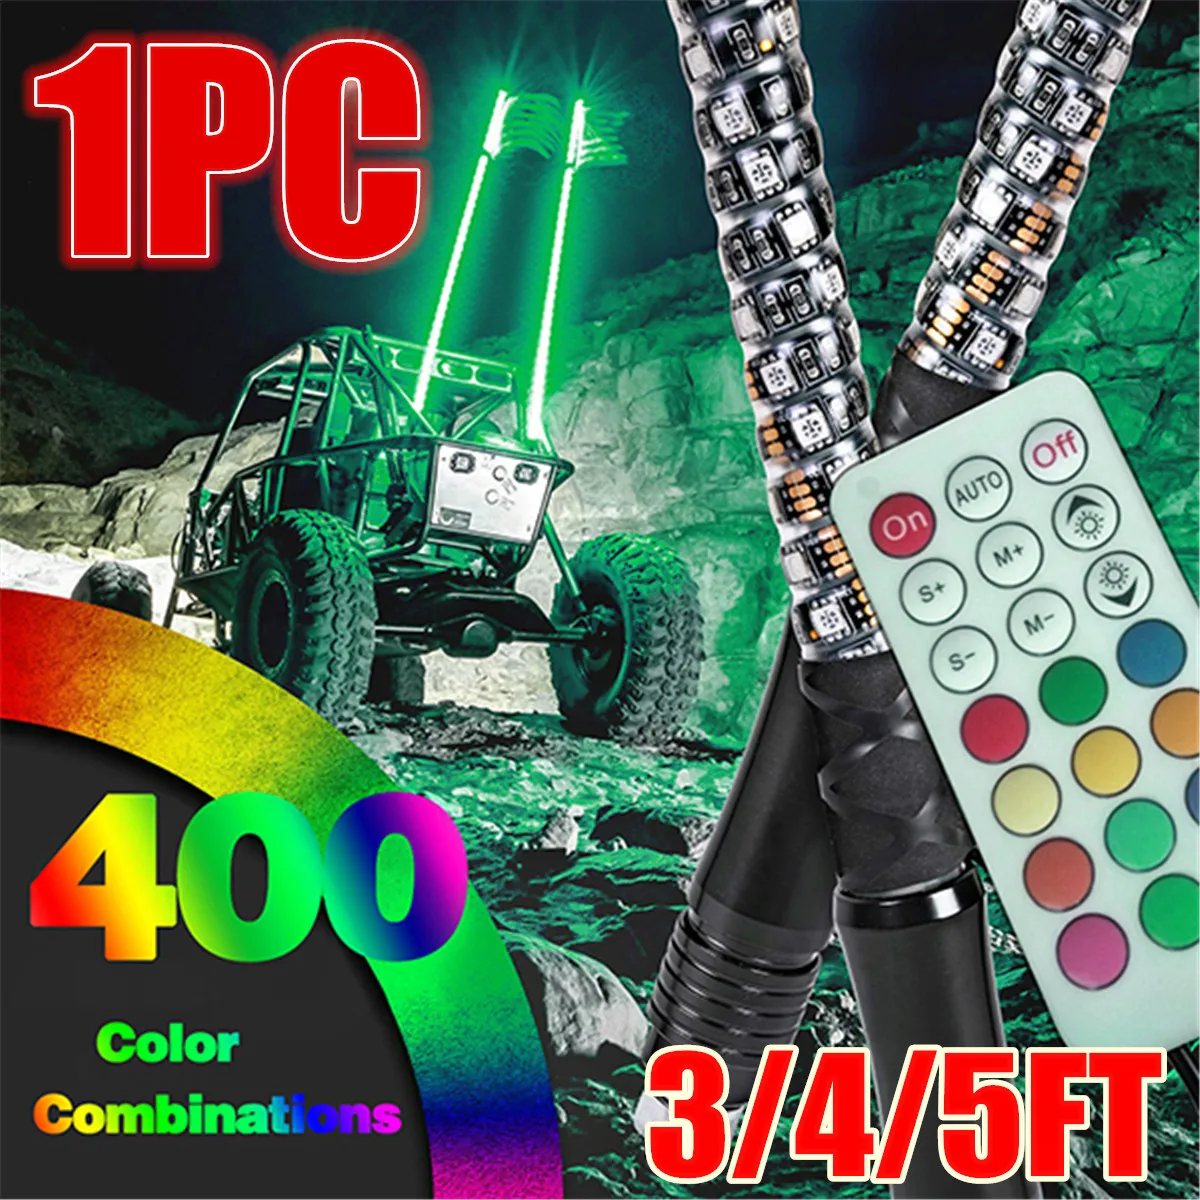 

3/4/5FT LED Whip Light RGB RZR LED Lamp Waterproof Bendable Remote Control Multi-color Super Bright Flag for SUV ATV Lamp Lights